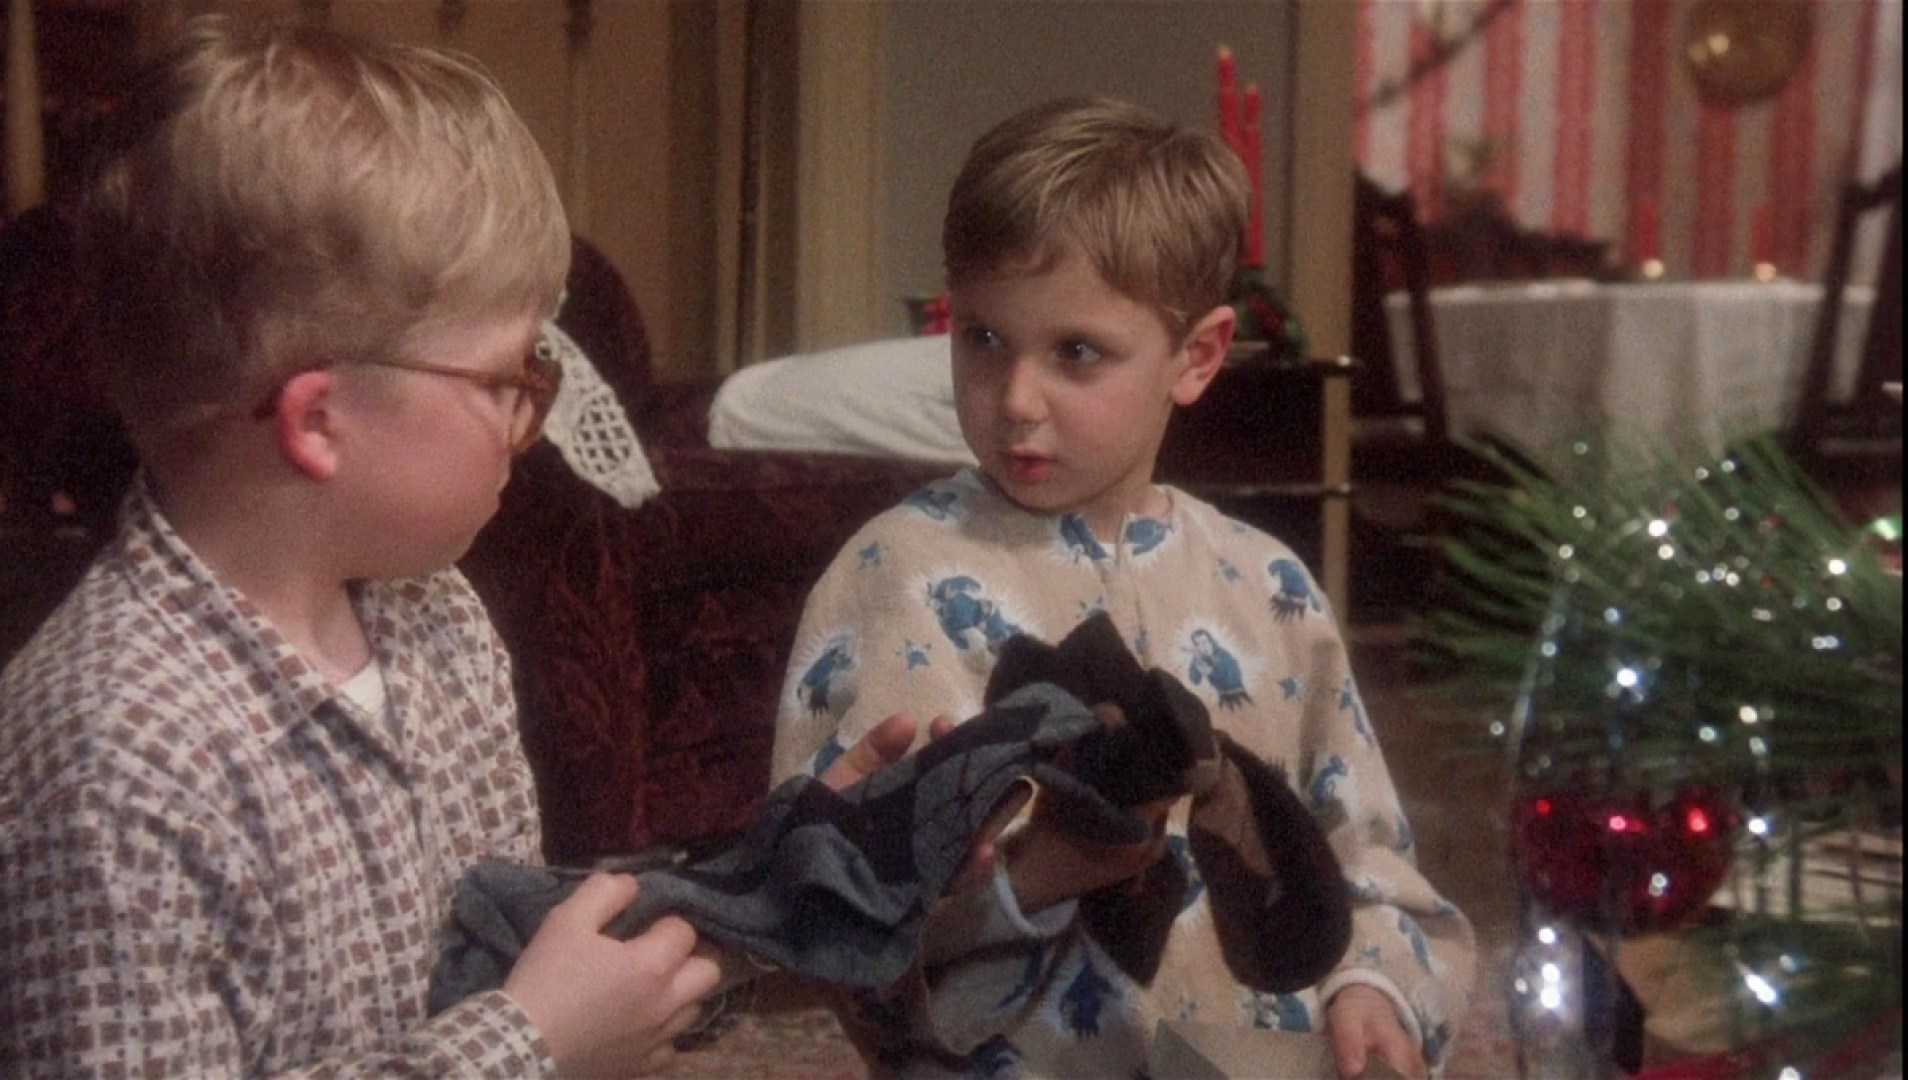 Peter Billingsley as Ralphie and Ian Petrella as Randy in A Christmas Story